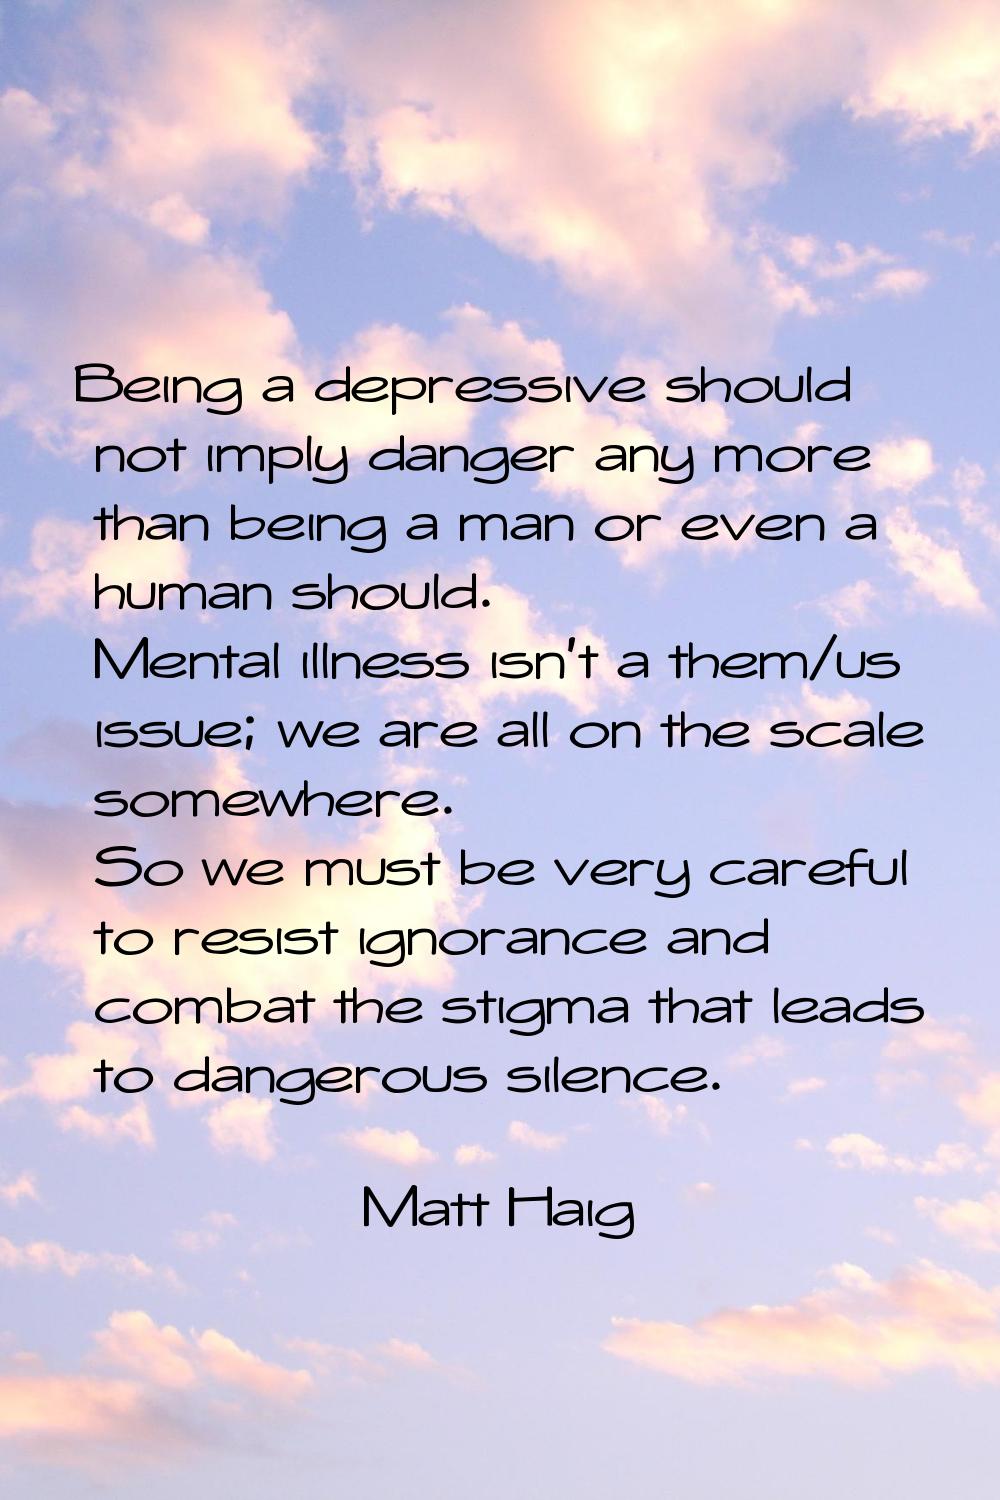 Being a depressive should not imply danger any more than being a man or even a human should. Mental